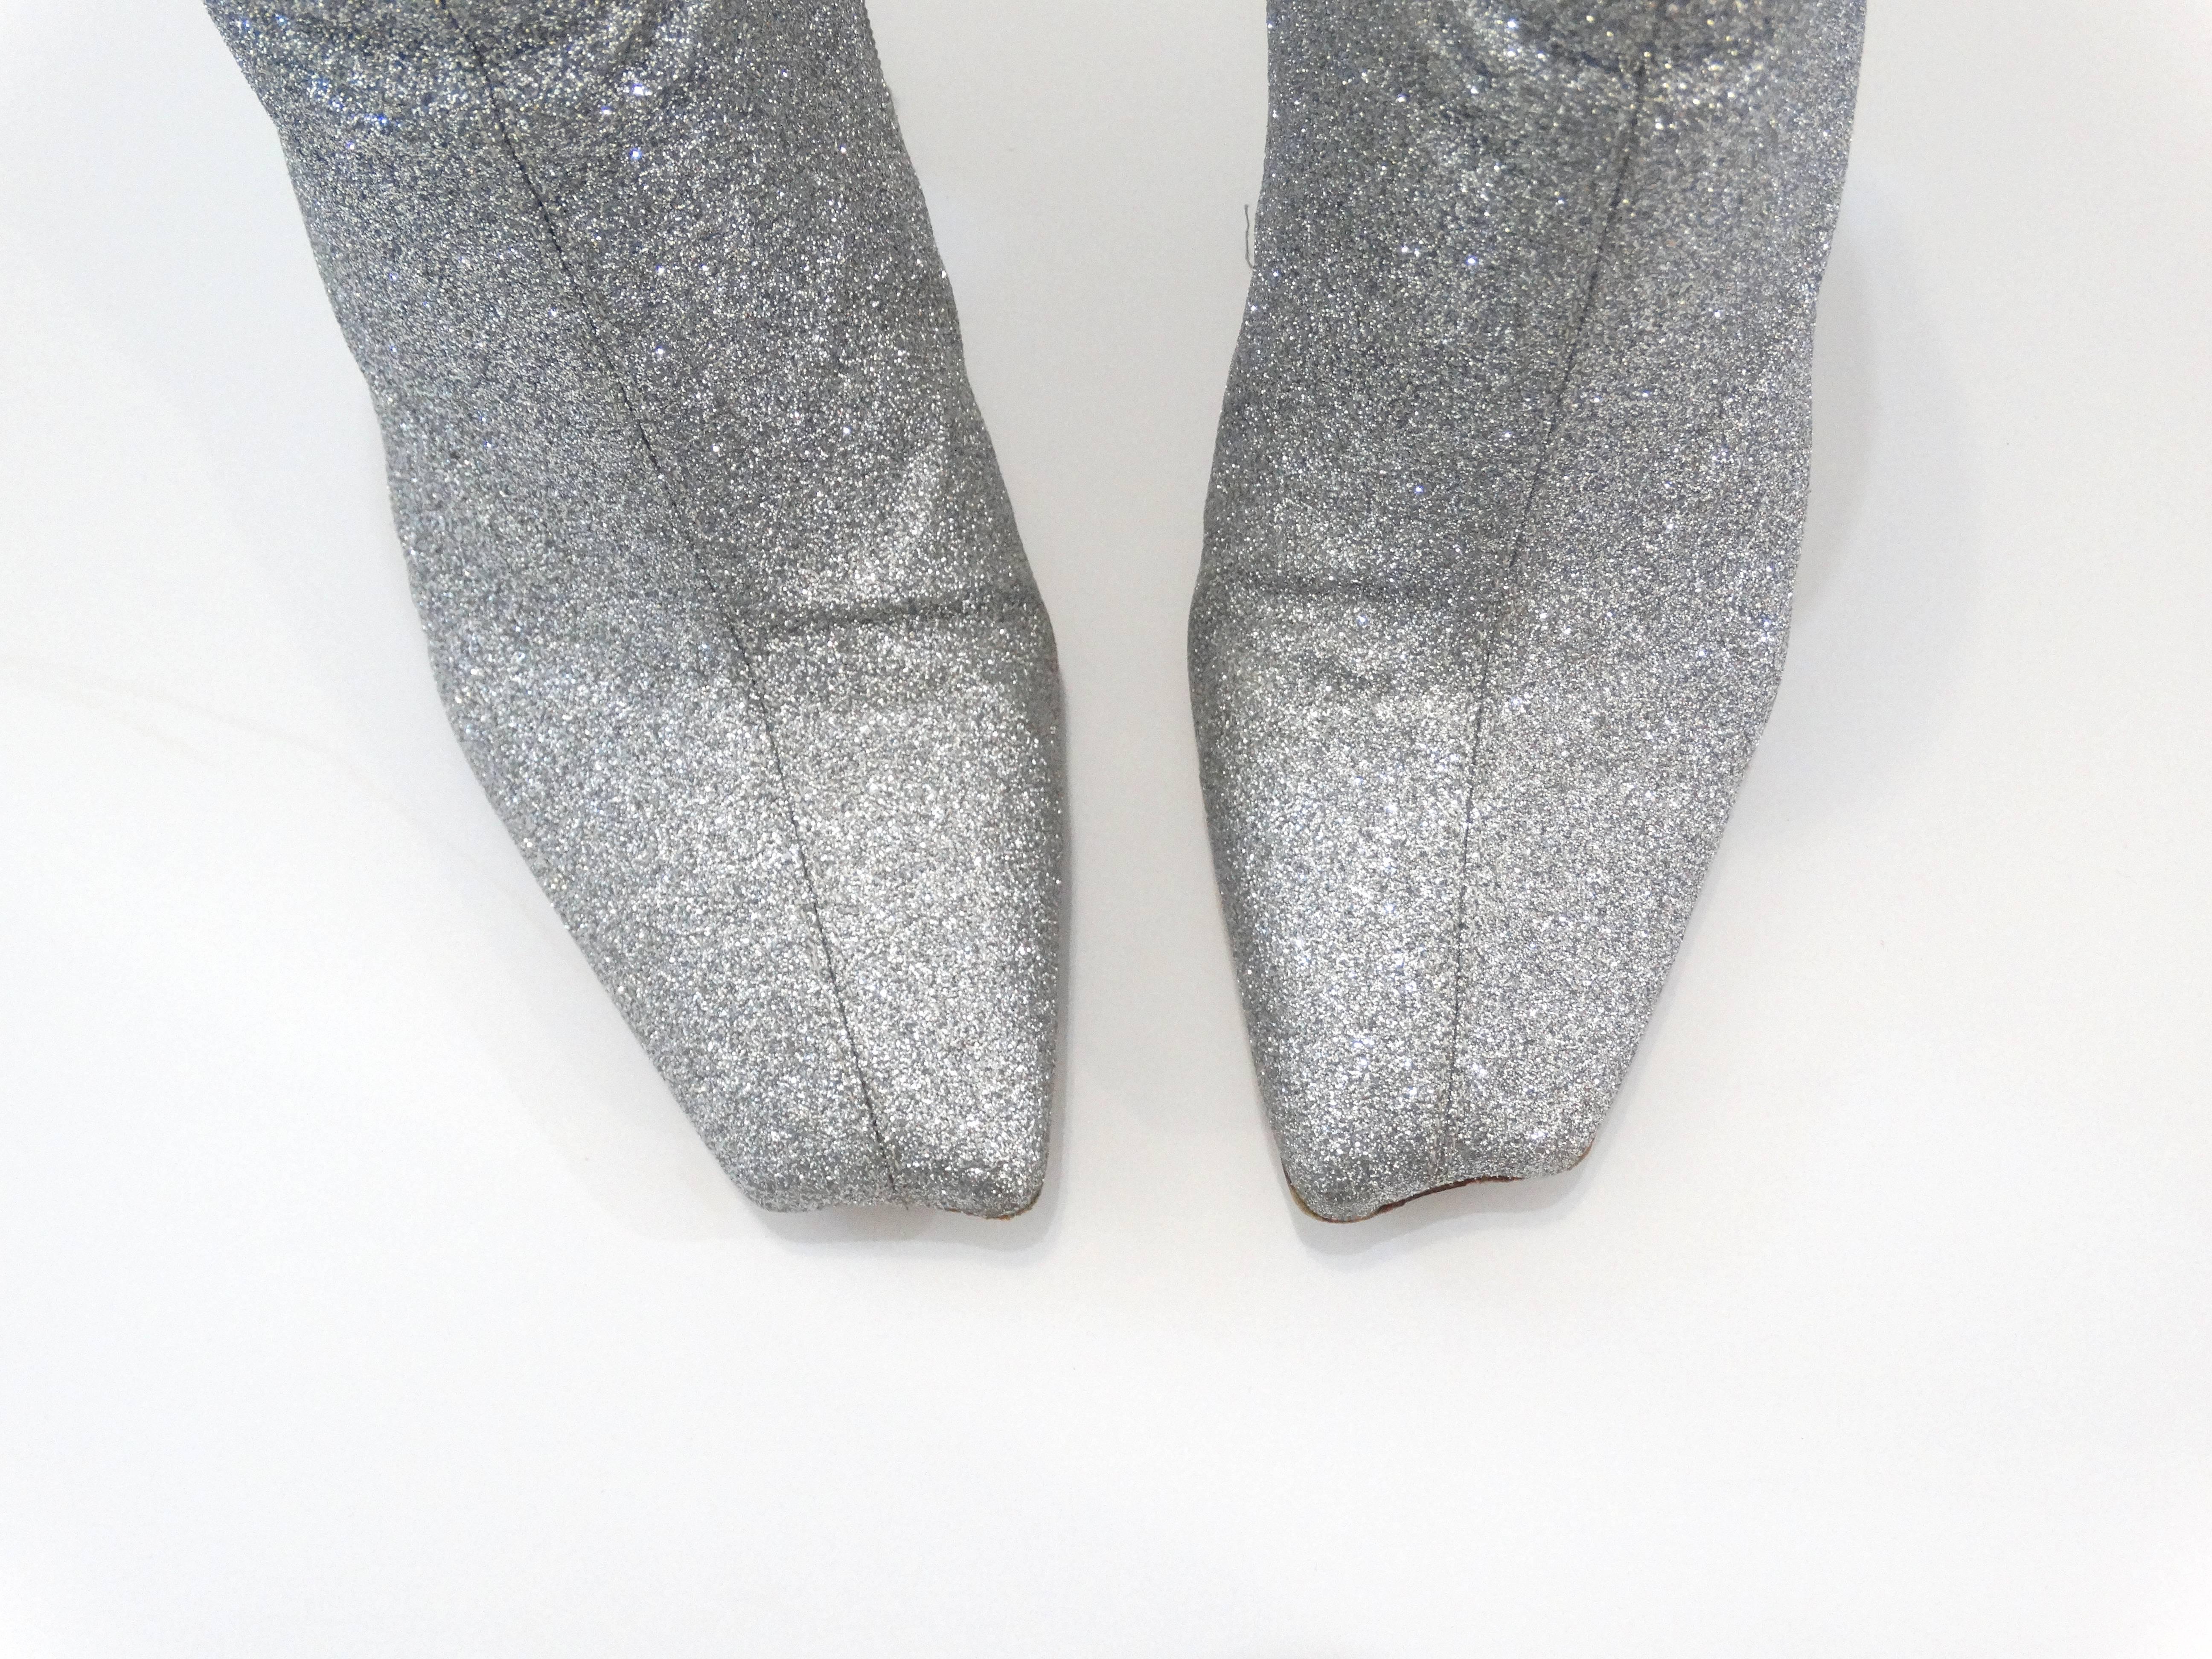 Coveted Maison Martin Margiela Silver Glitter Heeled Boots 2